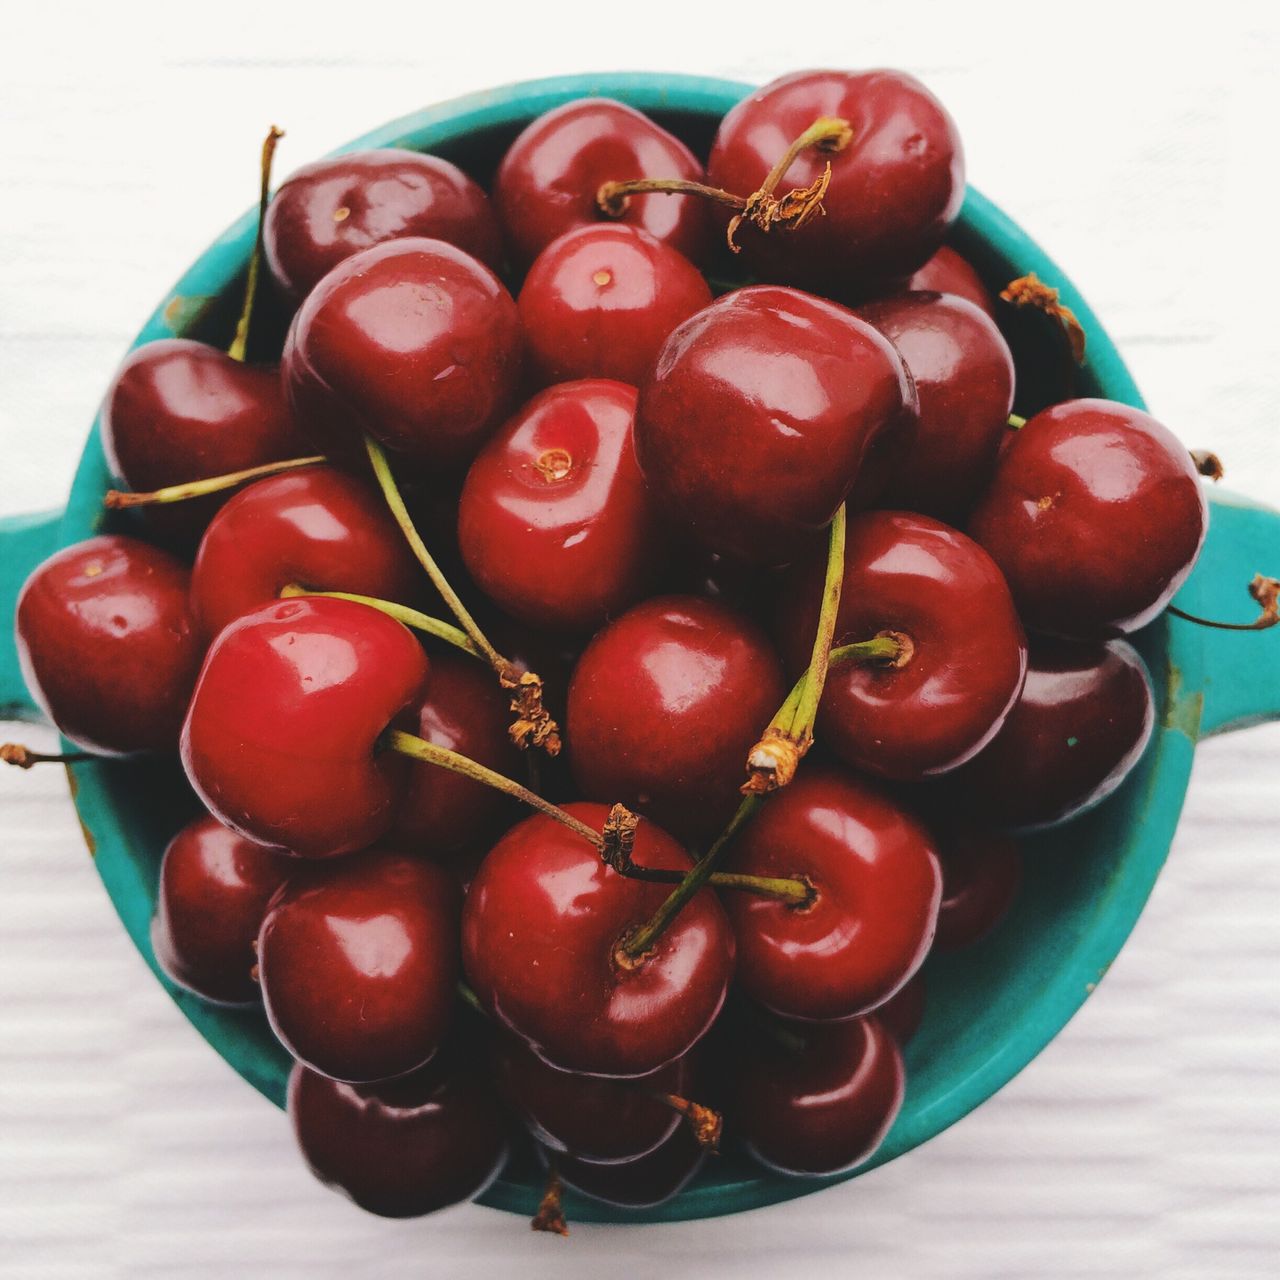 Directly above shot of fresh cherries in bowl on table